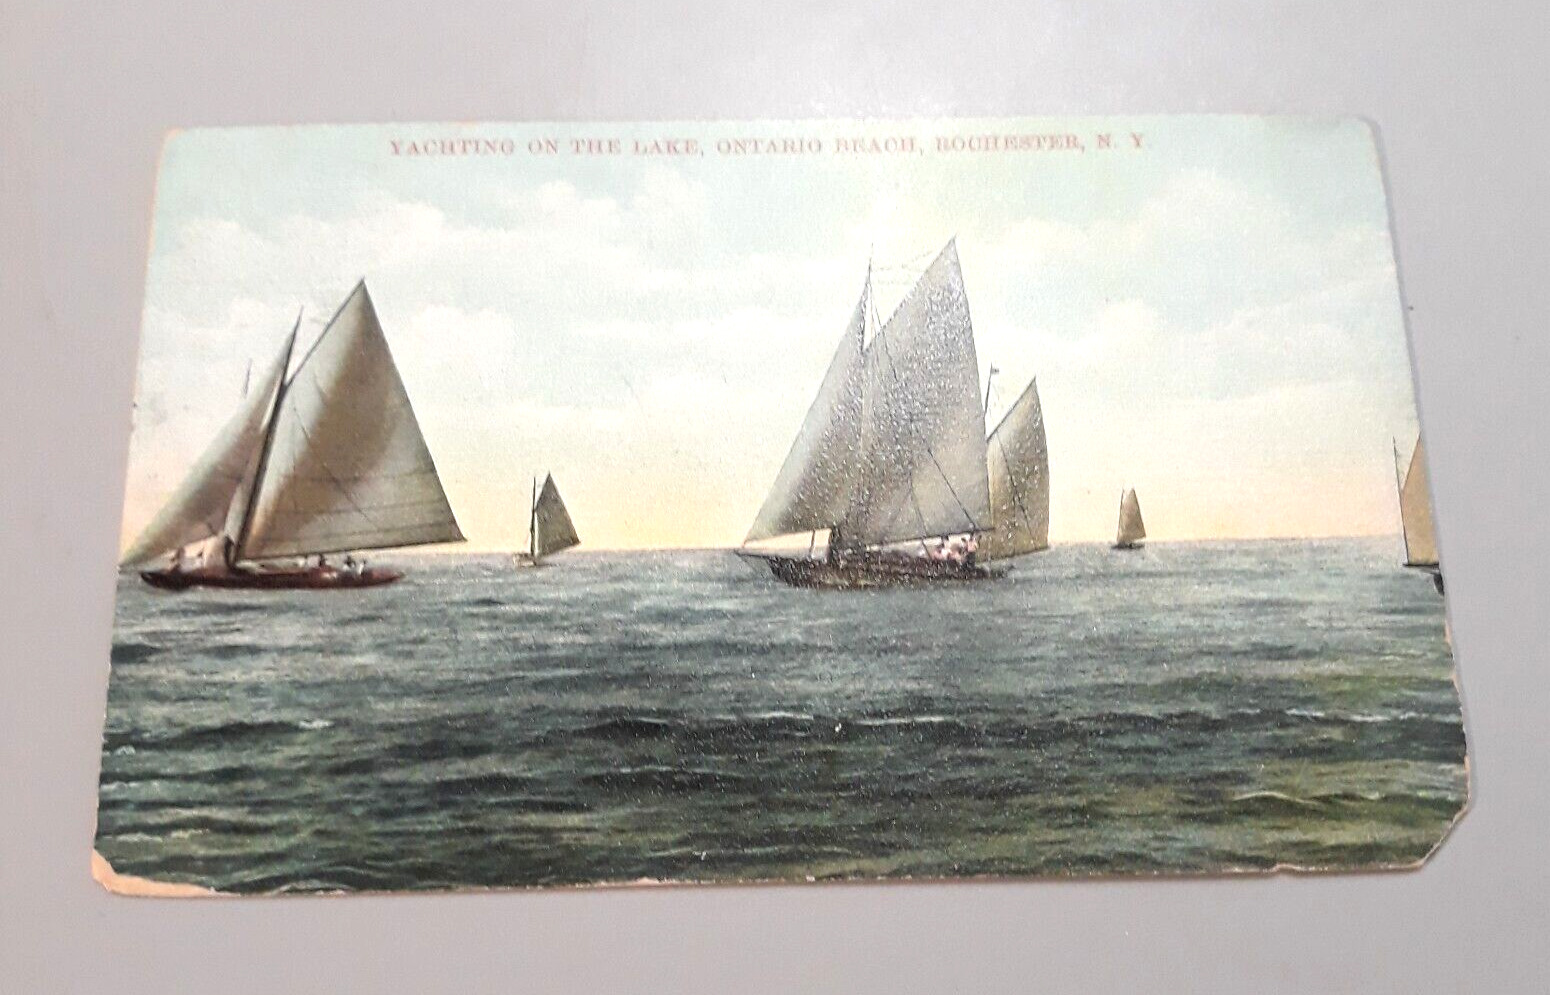 Vintage Postcard Rochester NY New York YACHTING ON THE LAKE Ontario Beach